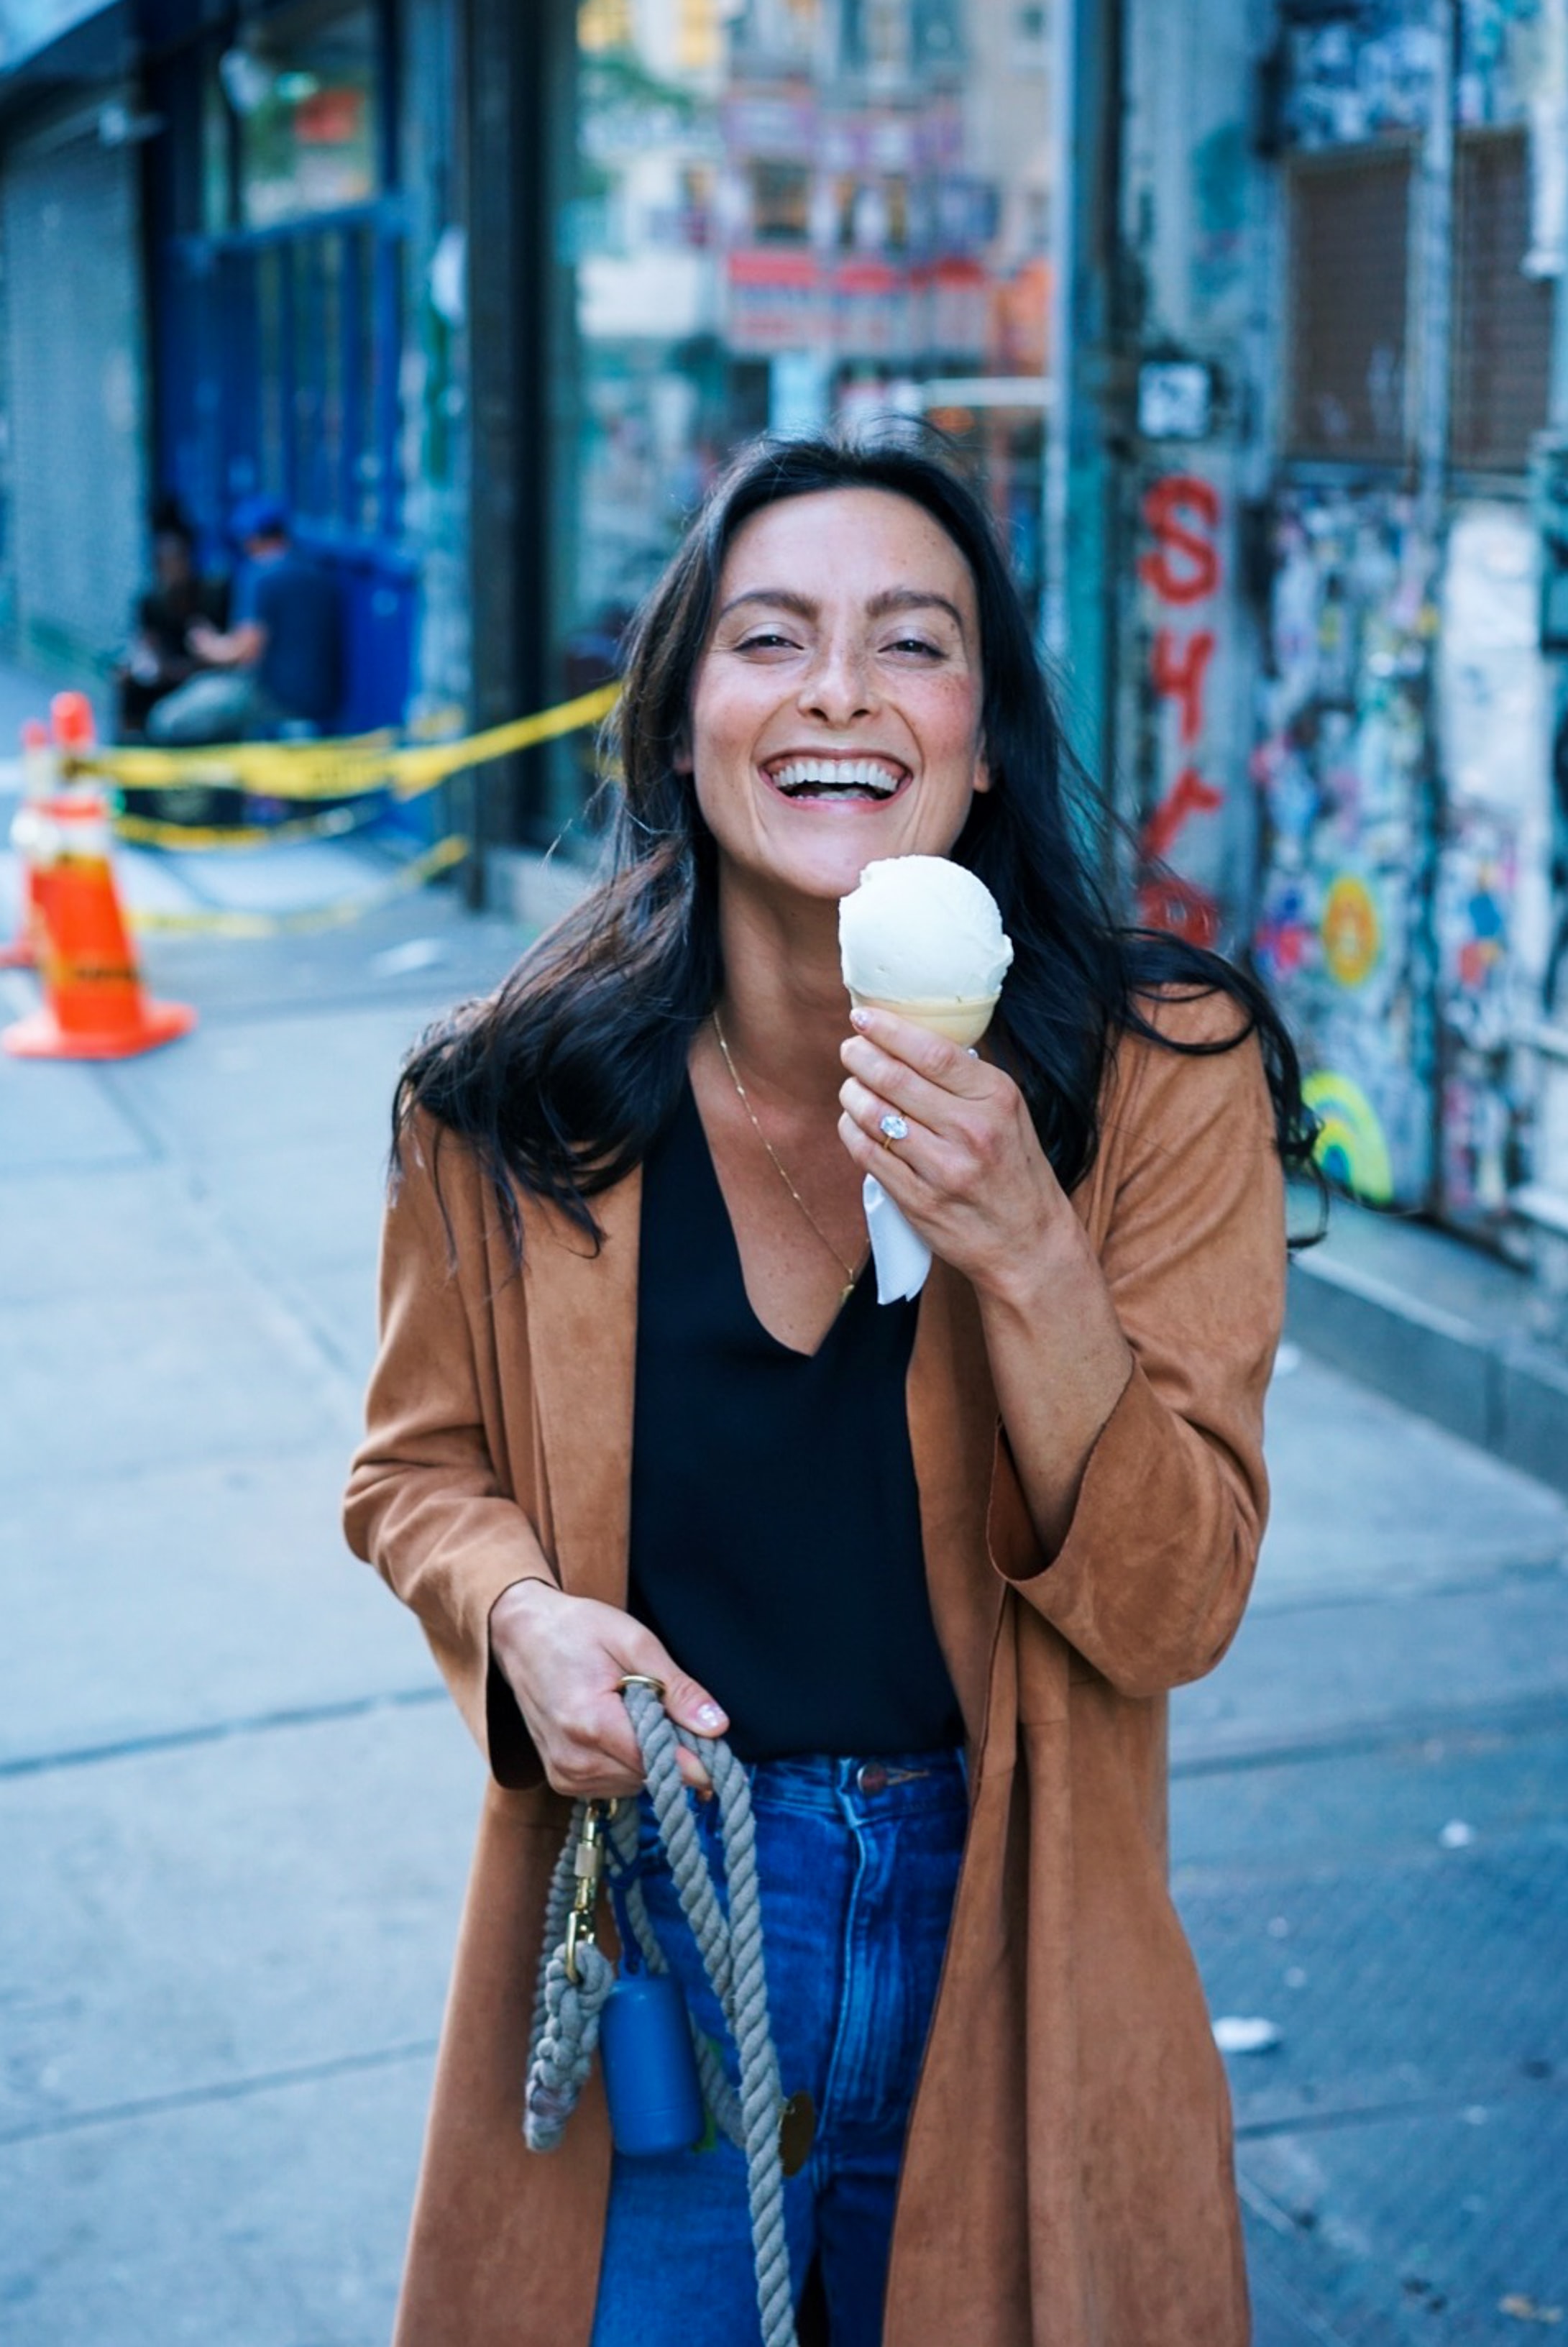 woman holding an ice cream cone and smiling